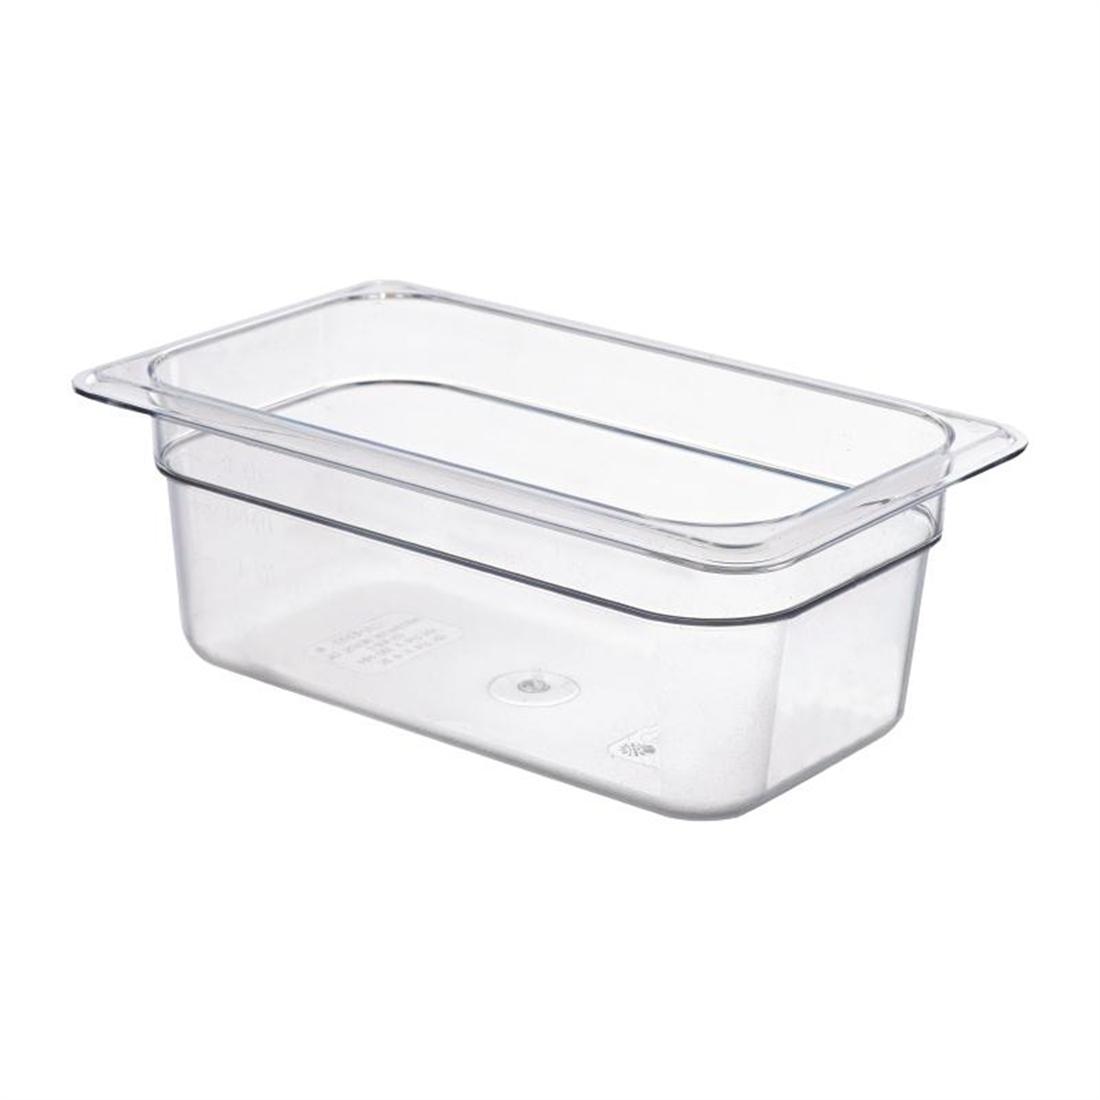 Cambro Polycarbonate 1/4 Gastronorm Pan 100mm